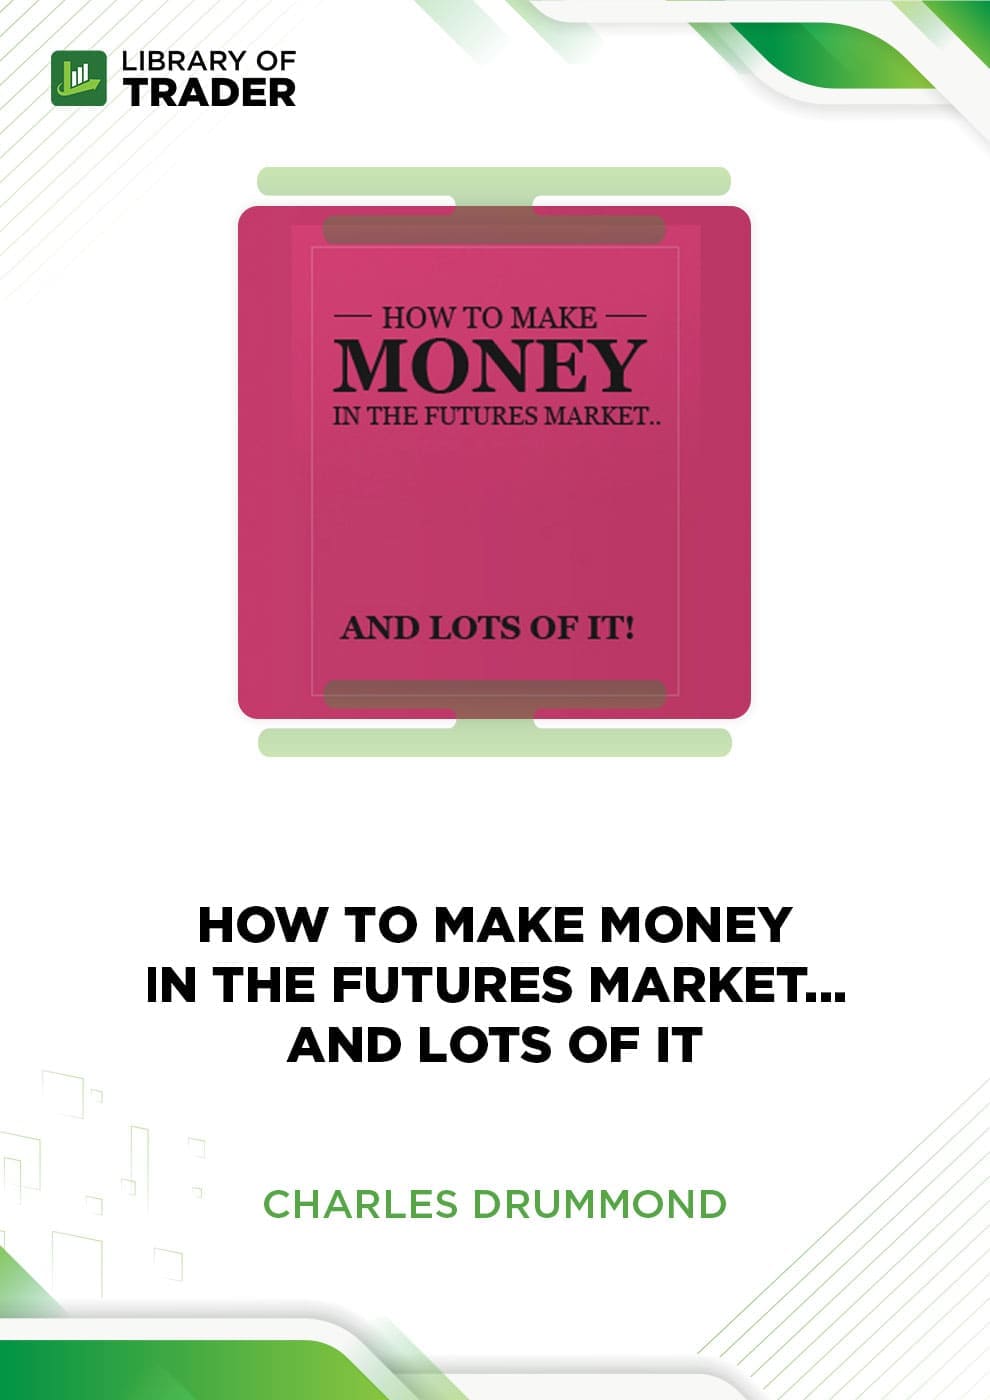 How to Make Money in the Futures Market ... and Lots of It by Charles Drummond